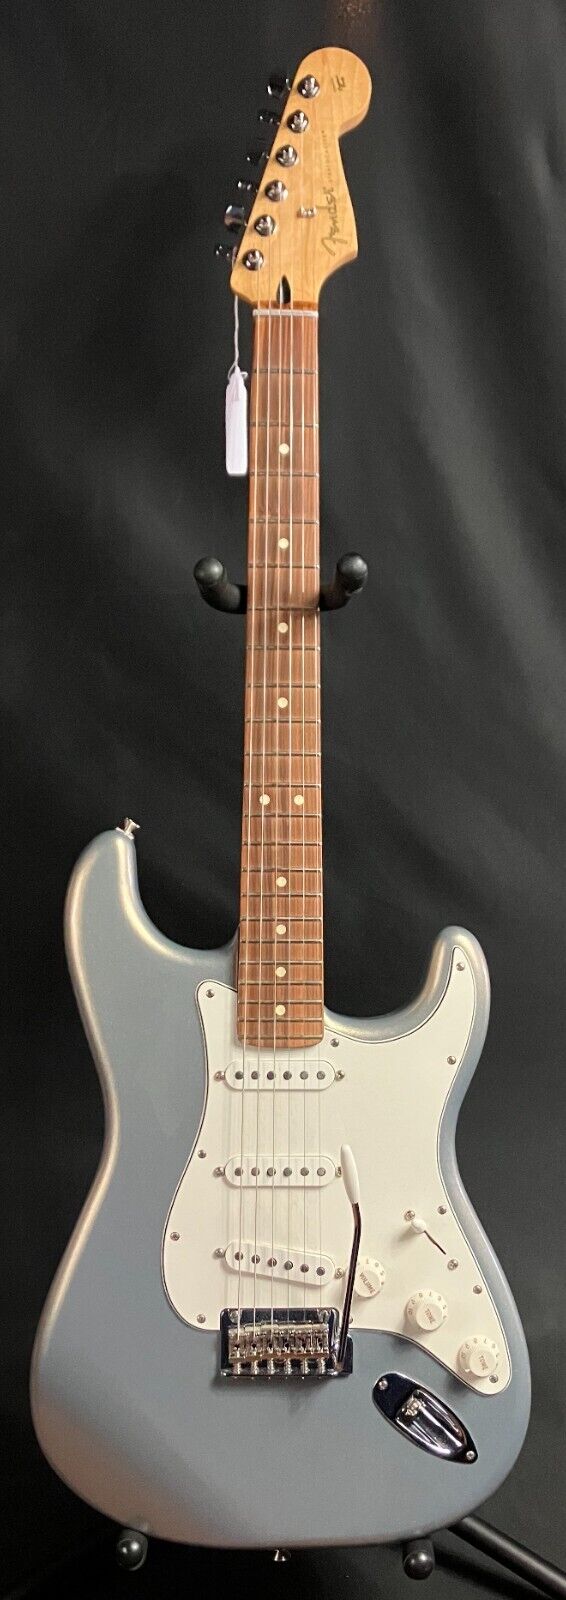 Fender Player Stratocaster Electric Guitar Gloss Silver Finish